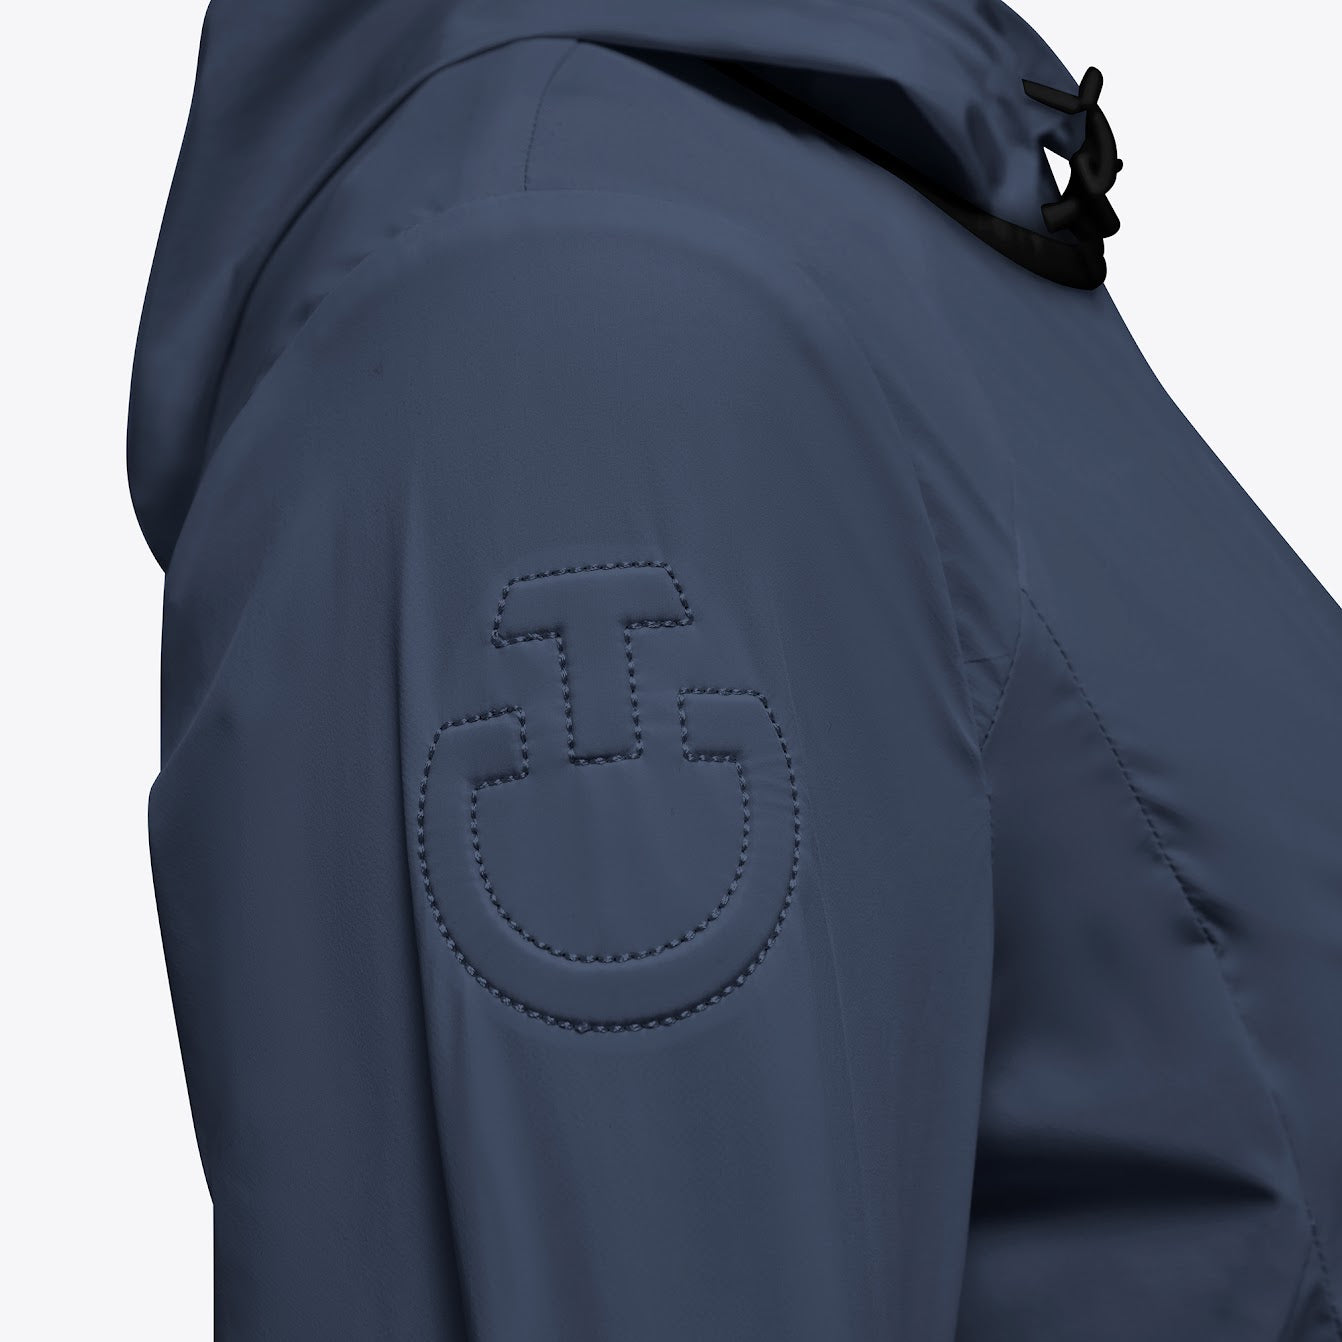 Cavalleria Toscana waterproof hooded jacket with breathable mesh insert in navy. 